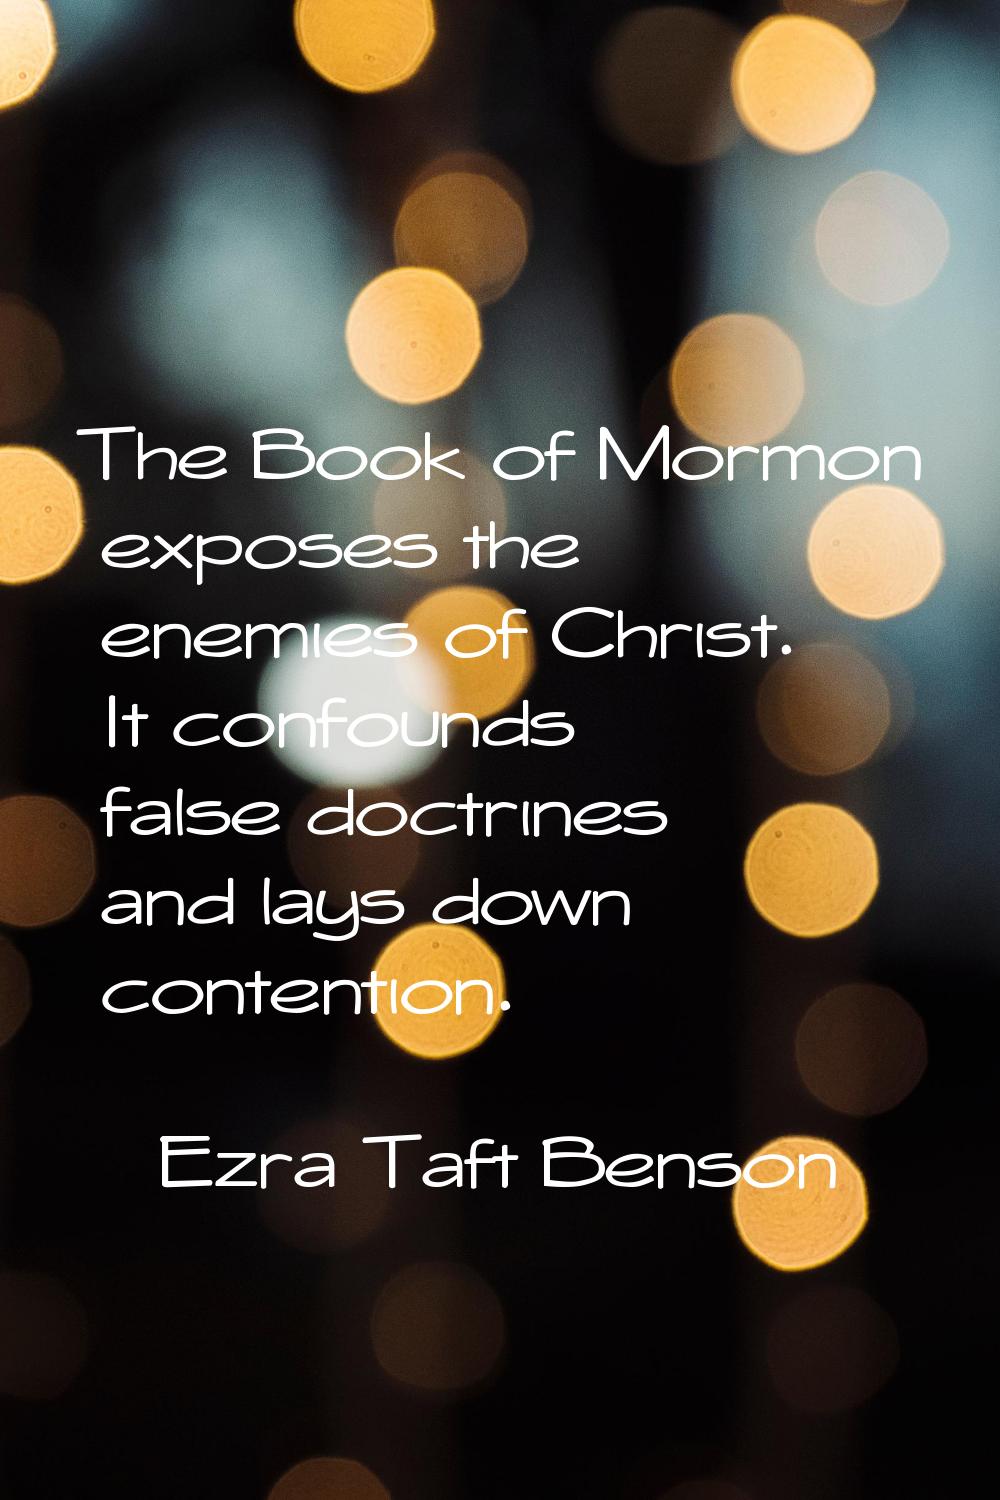 The Book of Mormon exposes the enemies of Christ. It confounds false doctrines and lays down conten